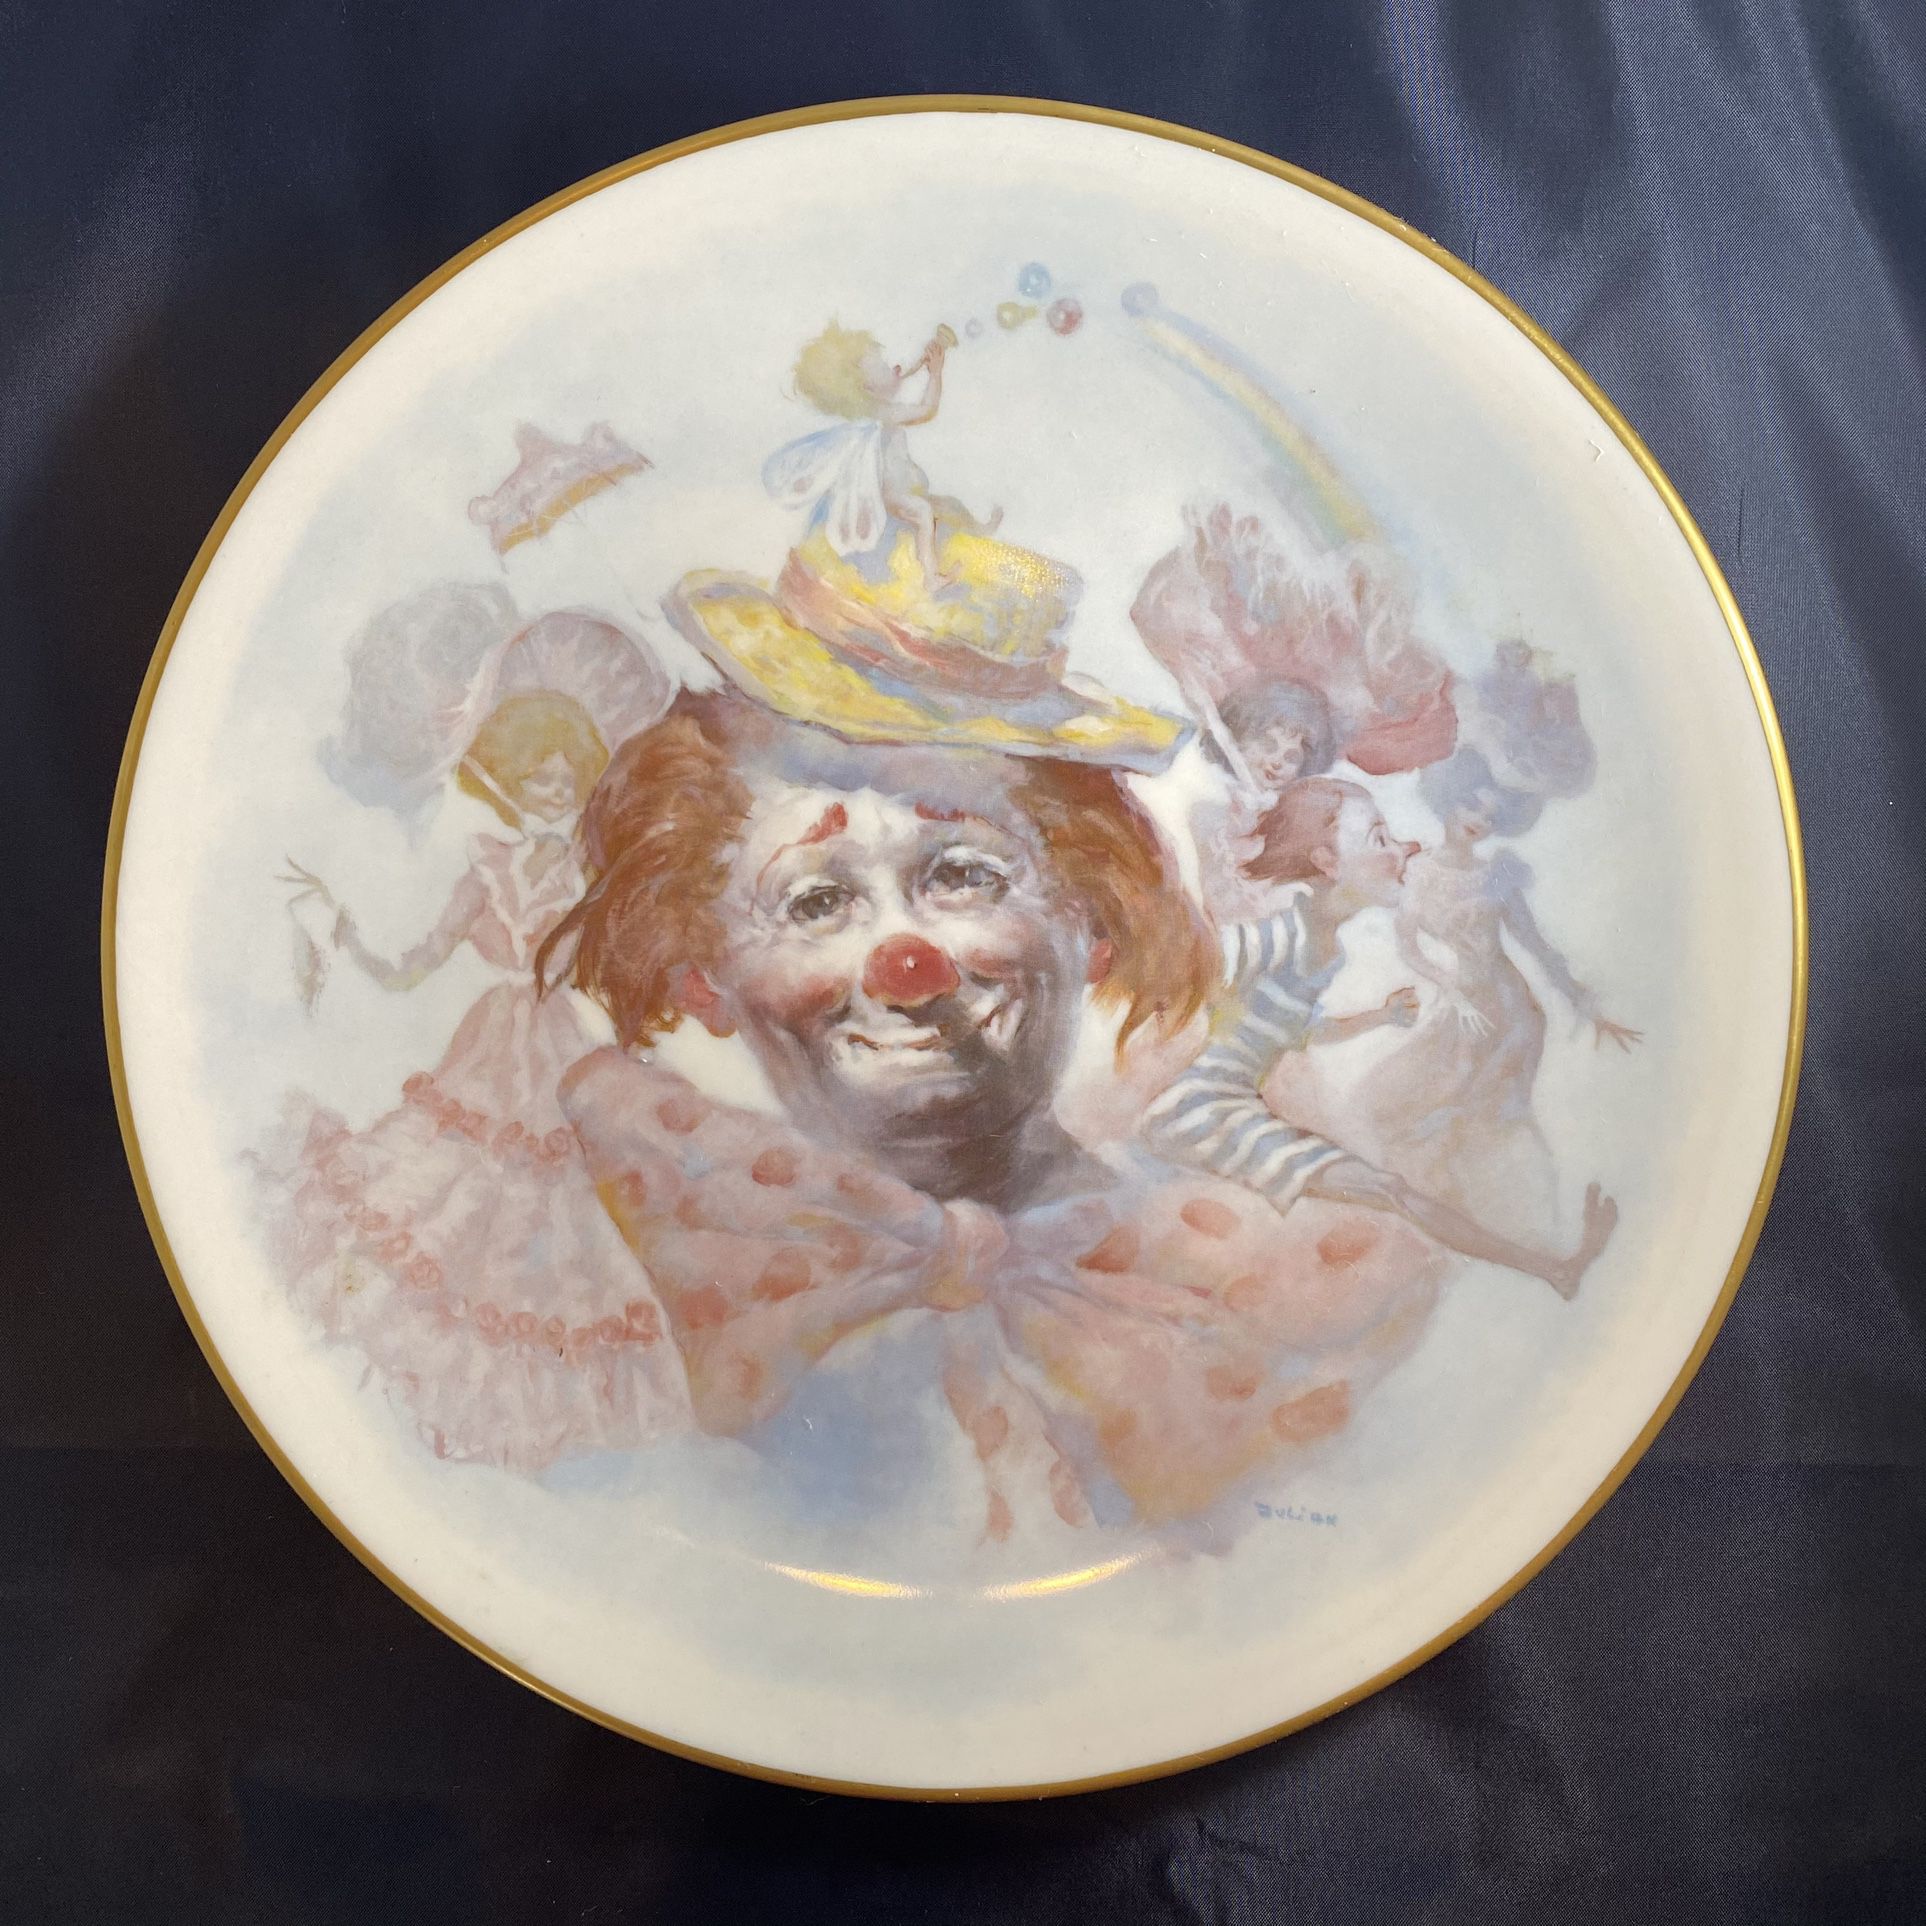 Julian Ritter Clown Plate, Gorham China Collectible Plate, 1977 Falling in Love Limited Edition Collectors Plate